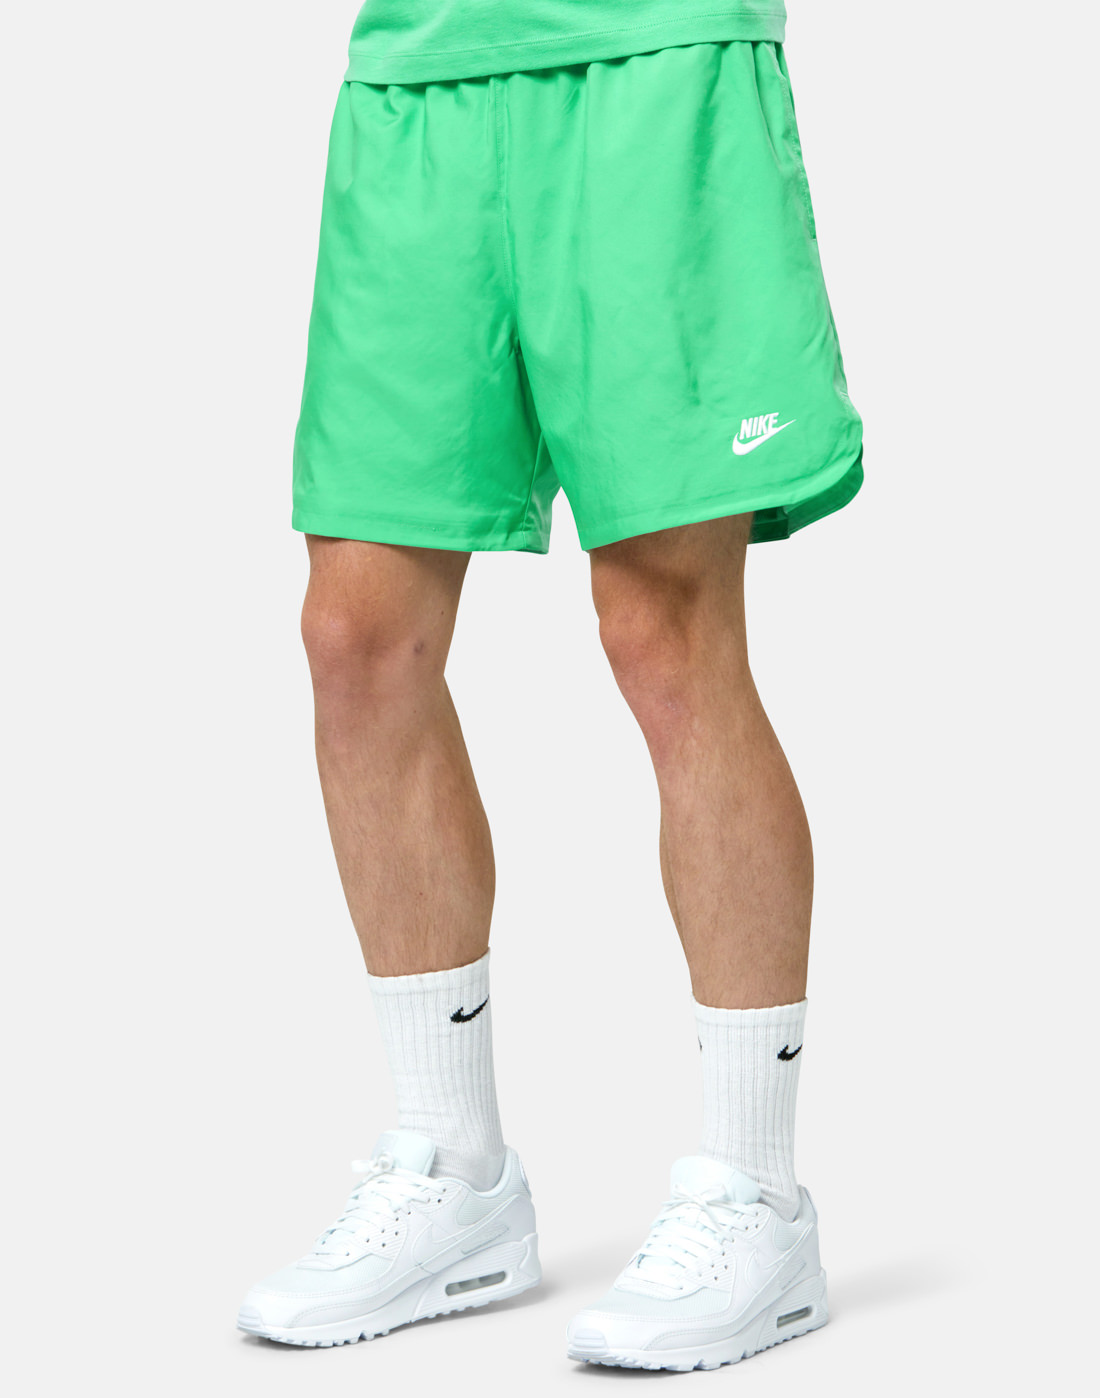 Nike Mens Club Woven Flow Shorts - Green | Life Style Sports UK